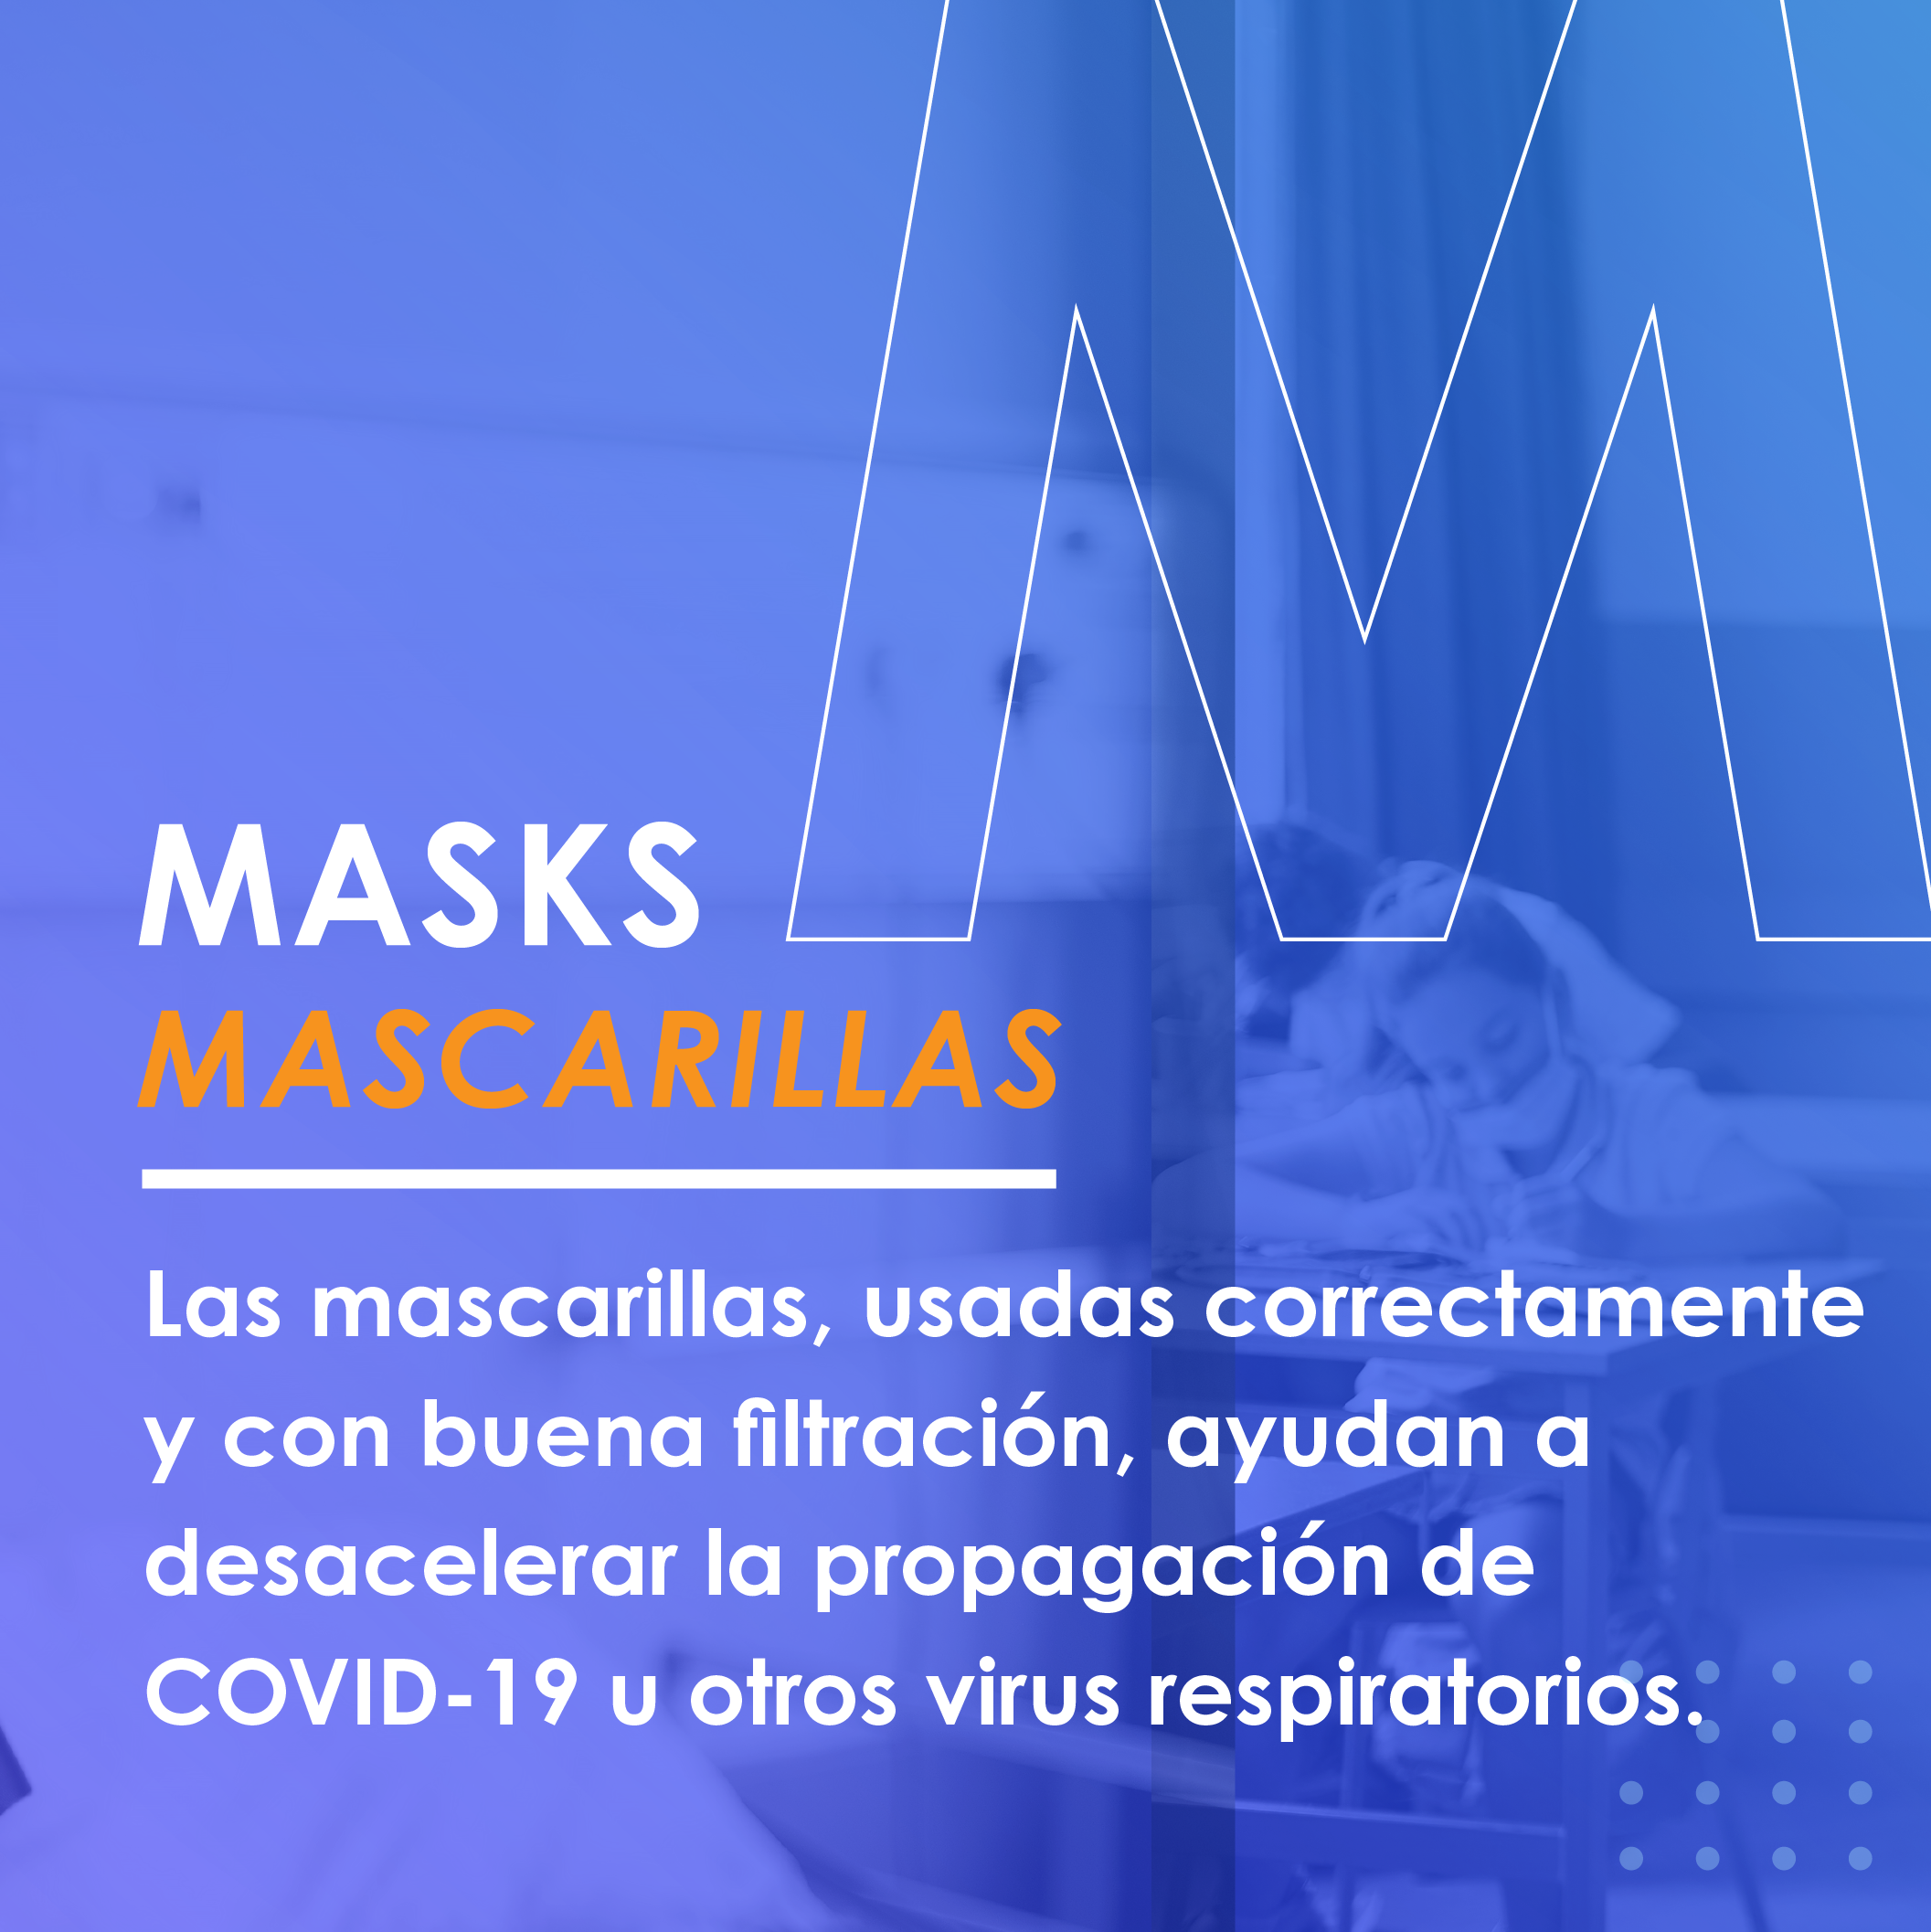 Masks. Wear a mask with good fit and filtration.